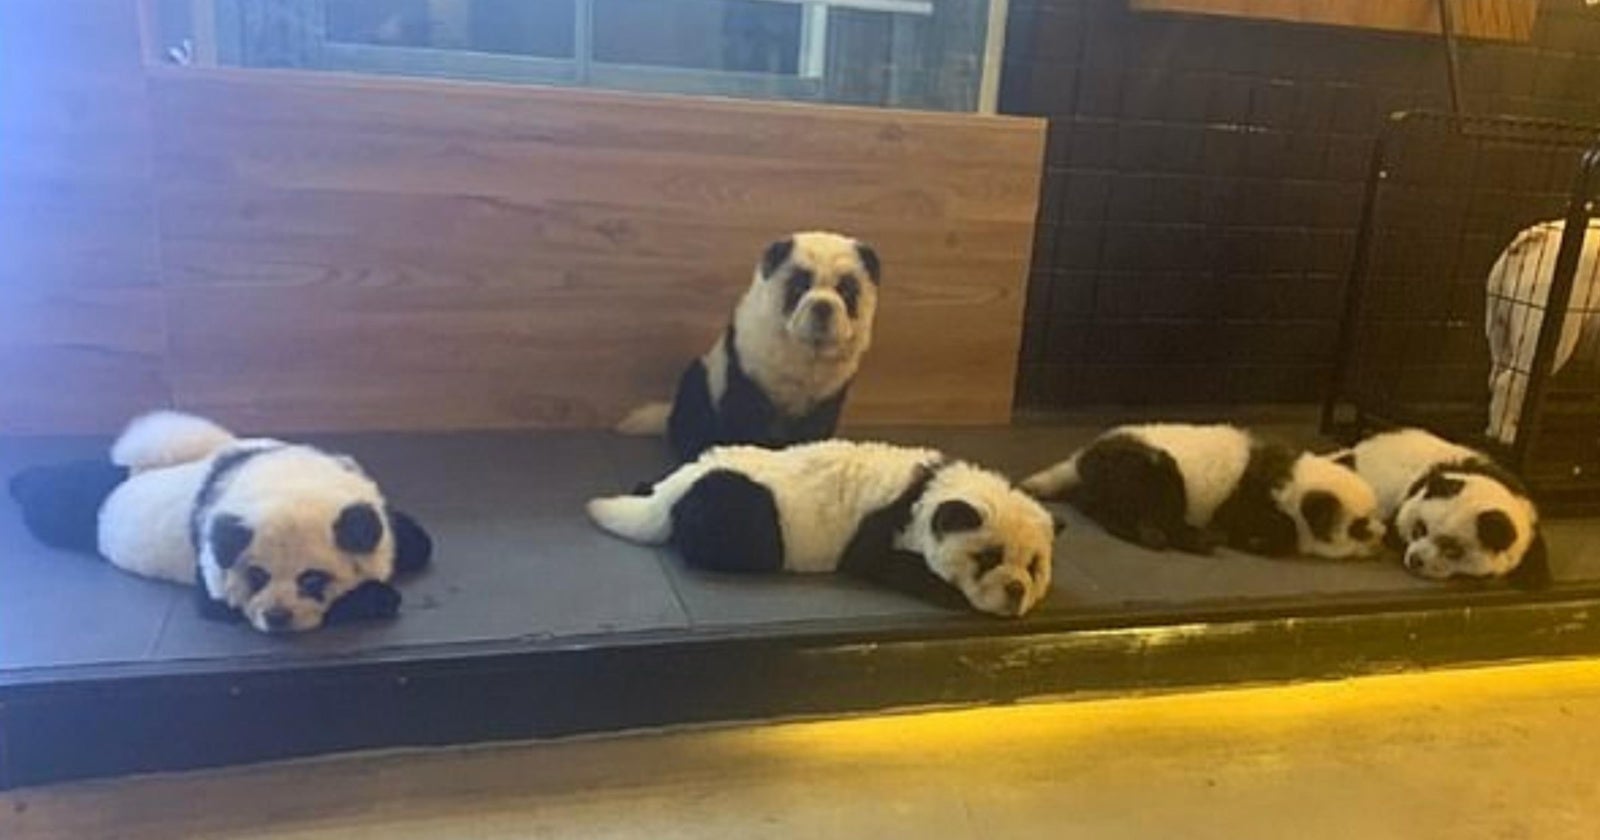 'Panda' Pet Cafe Under Fire By Netizens For Dyeing Chow Chows To Look Like Pandas - WORLD OF BUZZ 2